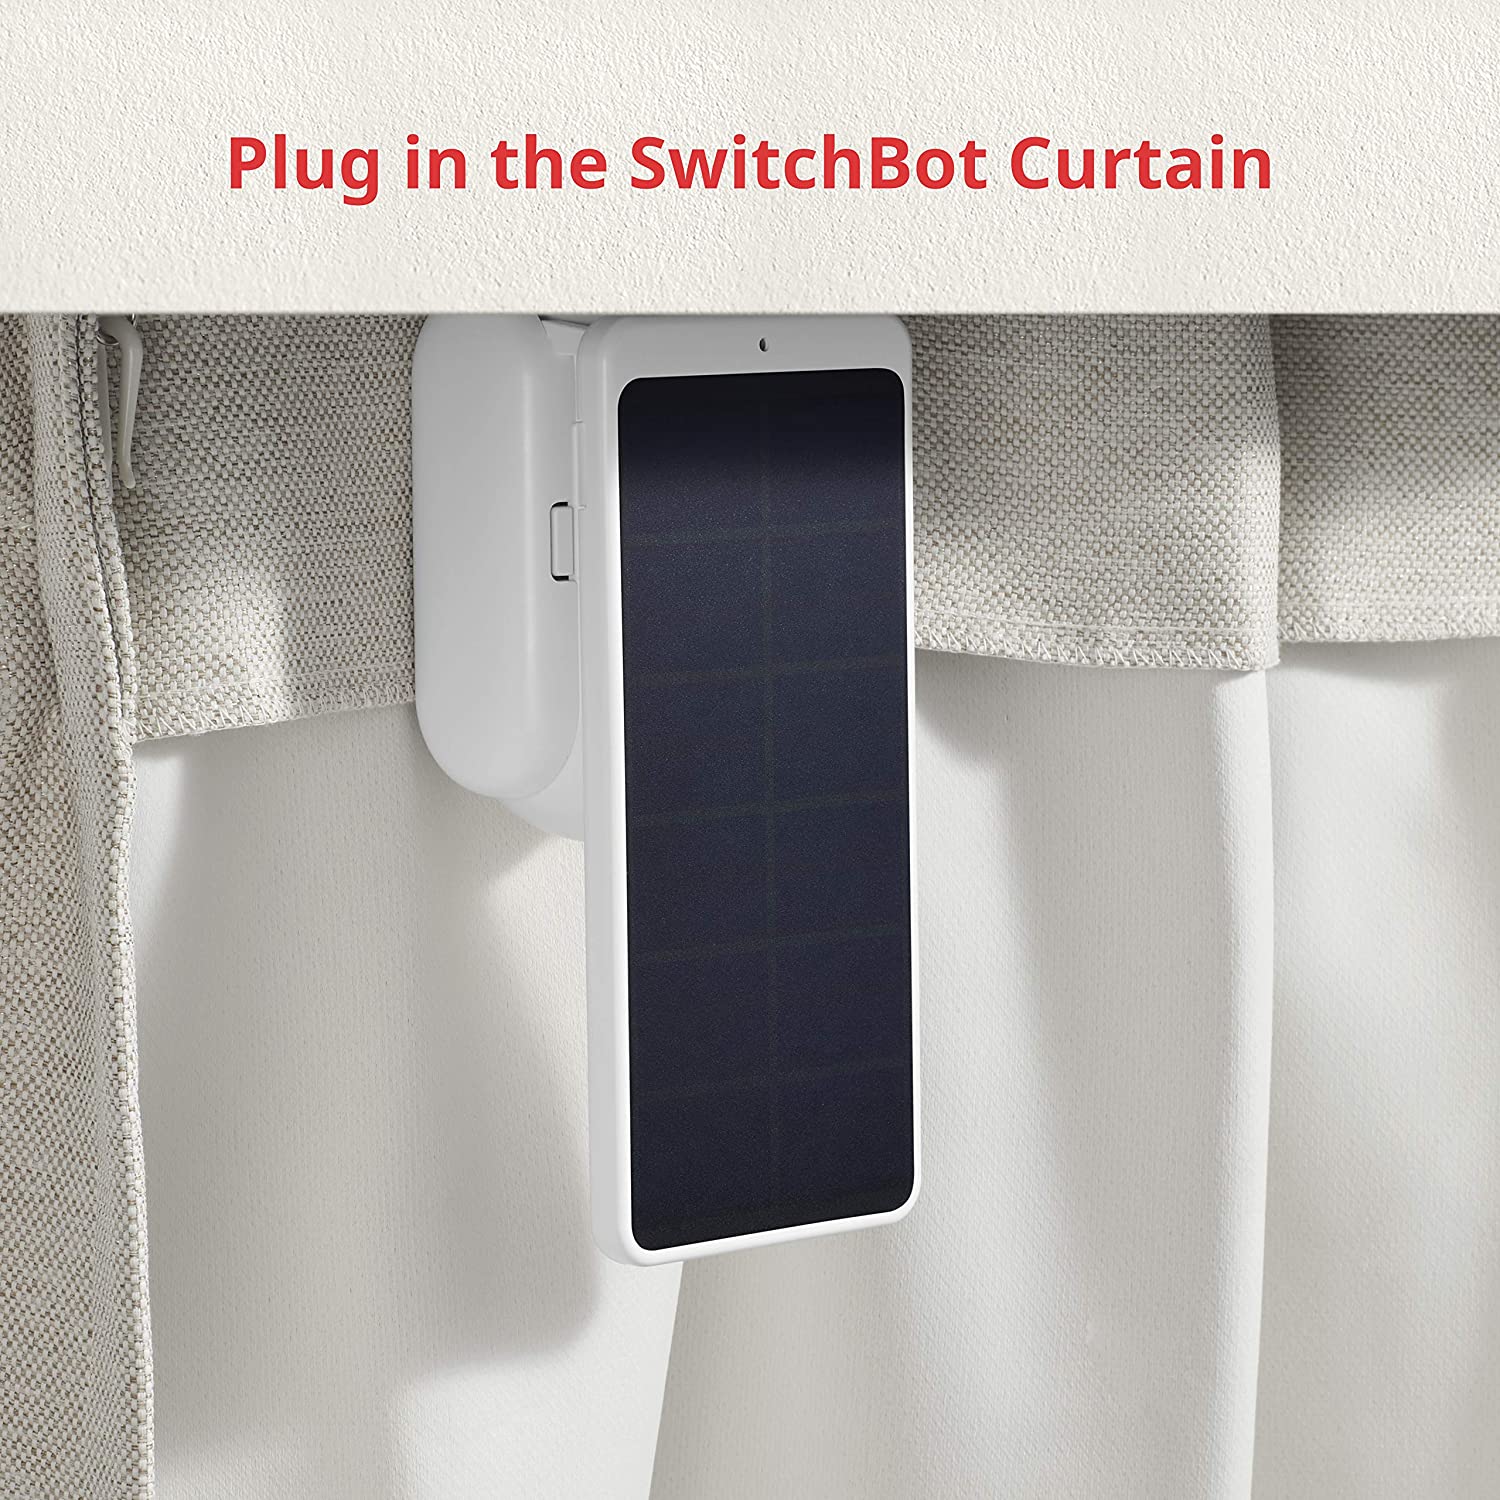 SwitchBot Solar Panel Charger | Works with U/Rod/I SwitchBot Curtain Models